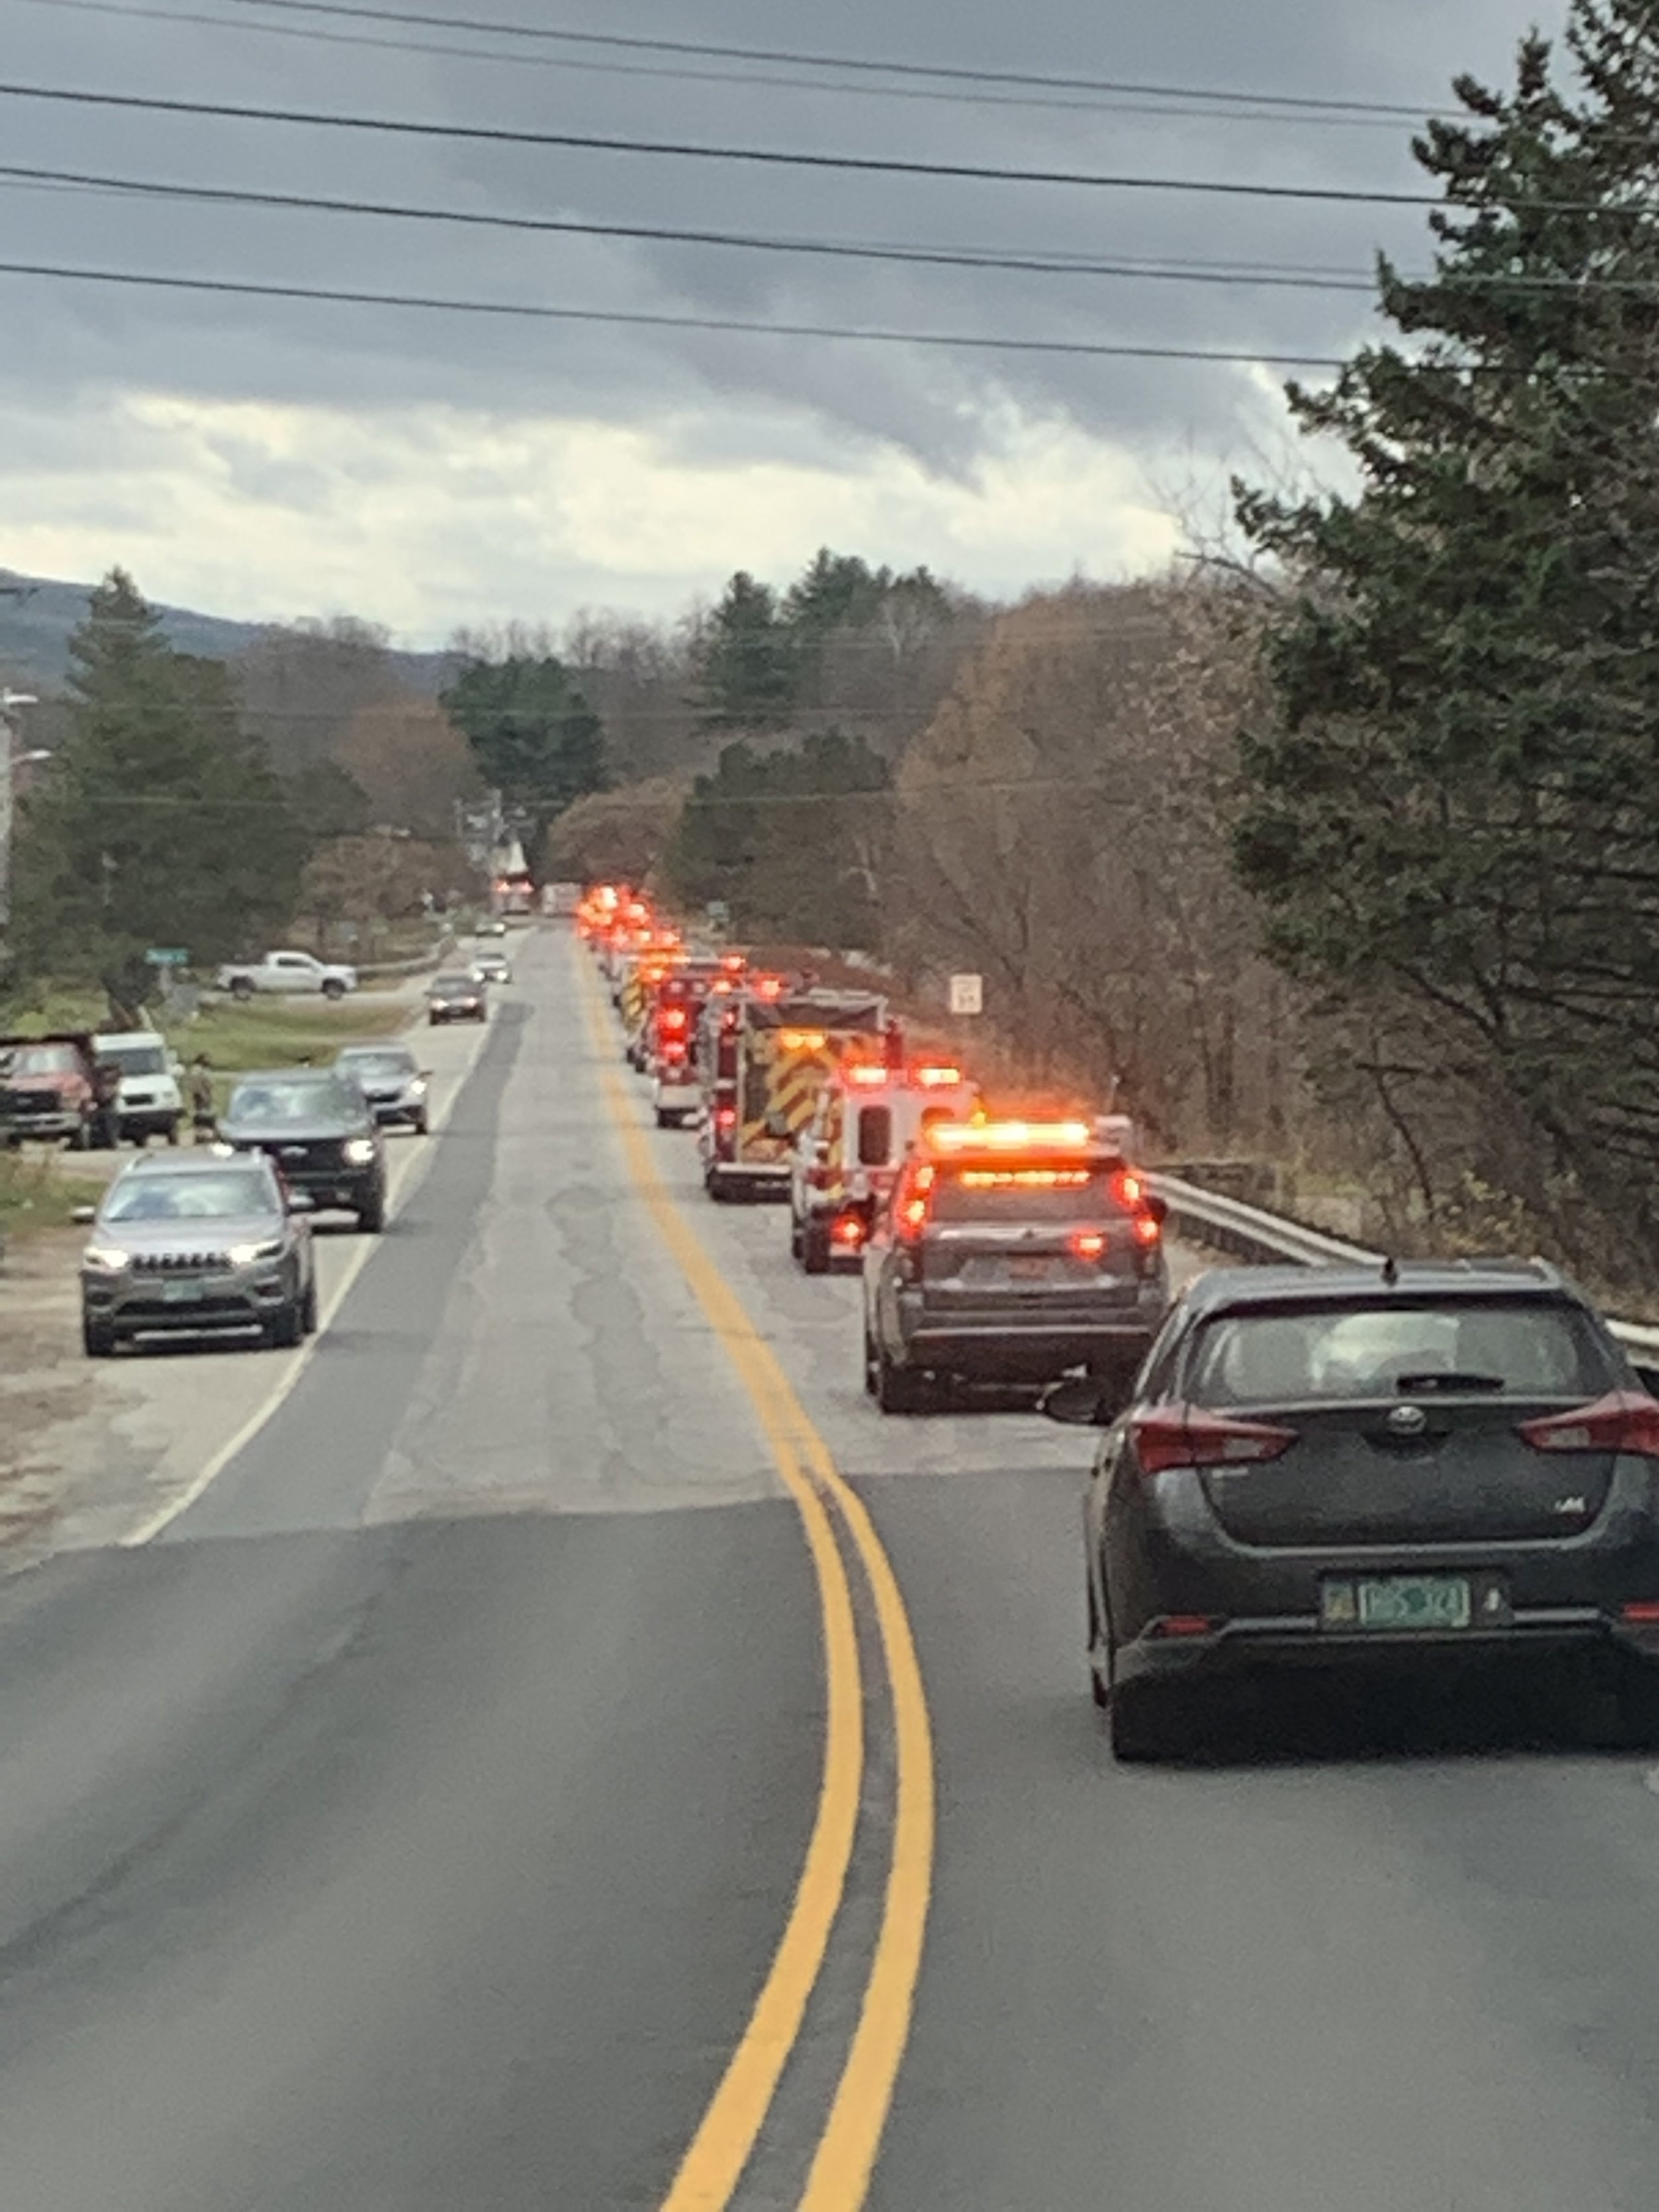  The procession travels down Vermont Route 12 to Northfield. Motorists in the oncoming lane pull to the shoulder as it passes. Photo by Lisa Scagliotti 